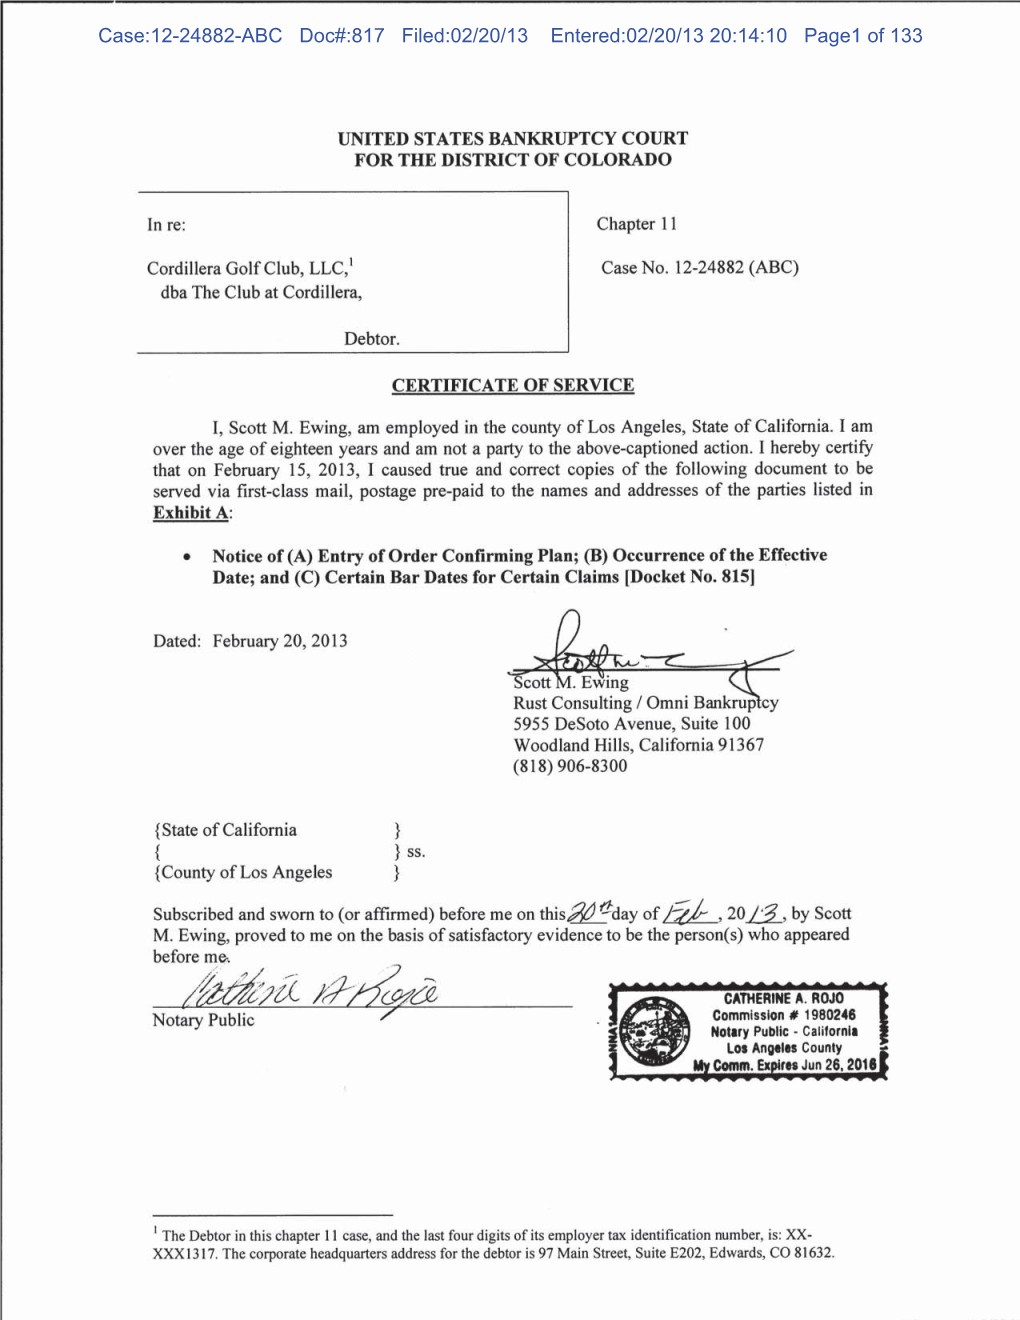 Case:12-24882-ABC Doc#:817 Filed:02/20/13 Entered:02/20/13 20:14:10 Page1 of 133 Case:12-24882-ABC Doc#:817 Filed:02/20/13 Entered:02/20/13 20:14:10 Page2 of 133